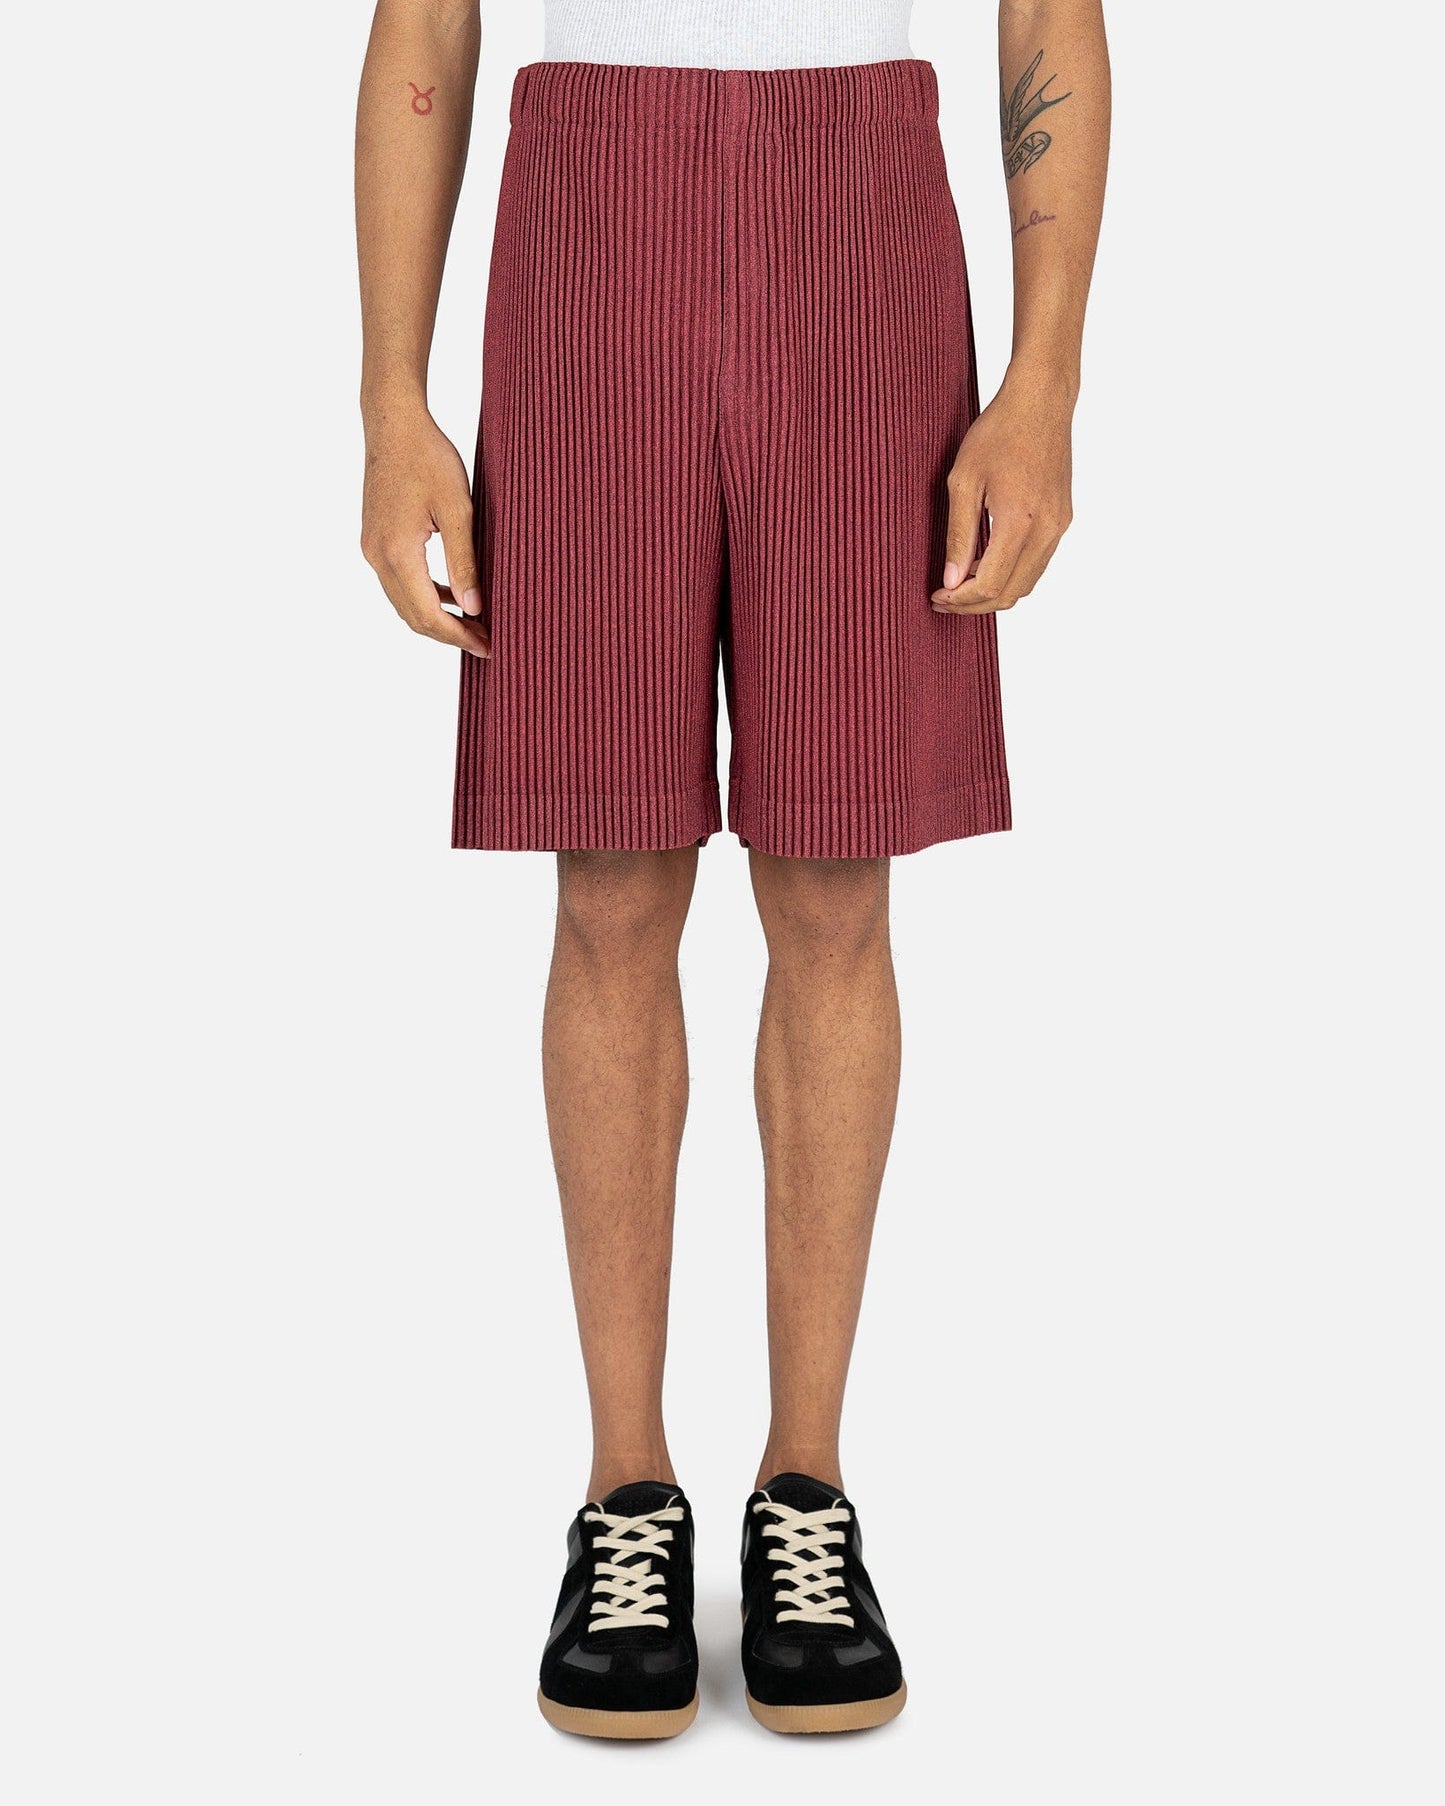 Homme Plissé Issey Miyake Men's Shorts Heather Pleats Shorts in Red